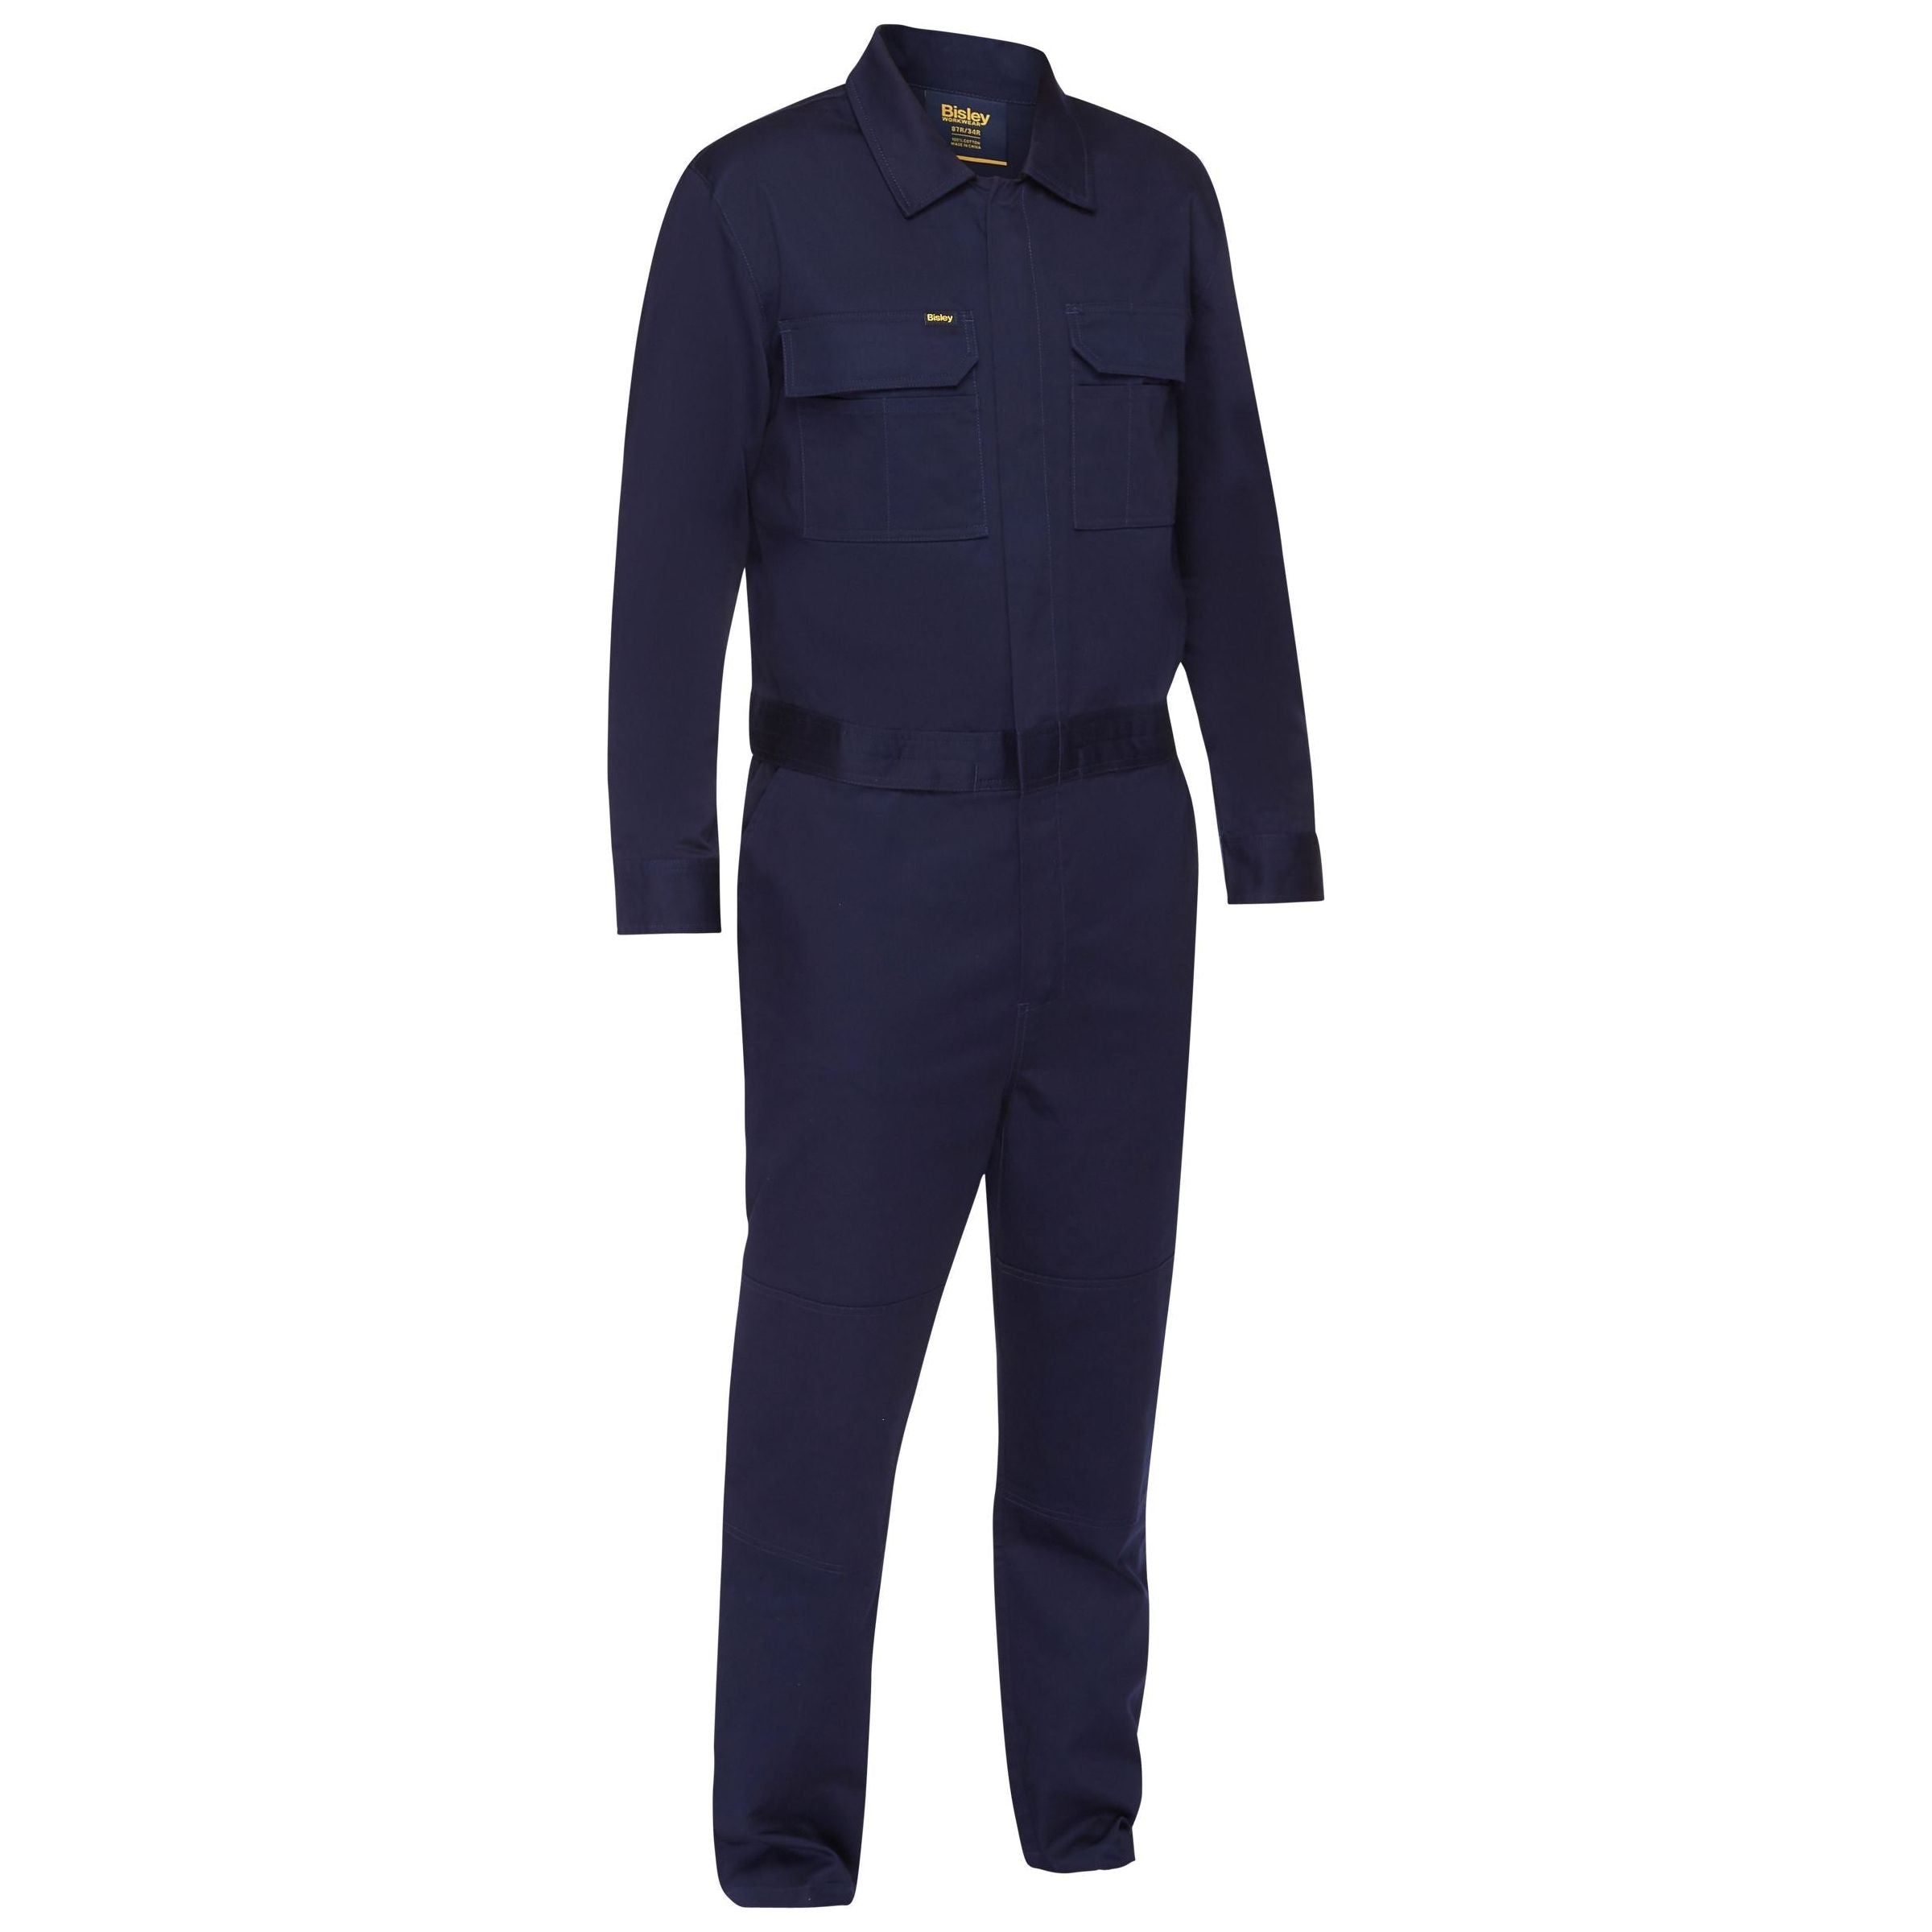 Work Coverall with Waist Zip Opening - BC6065